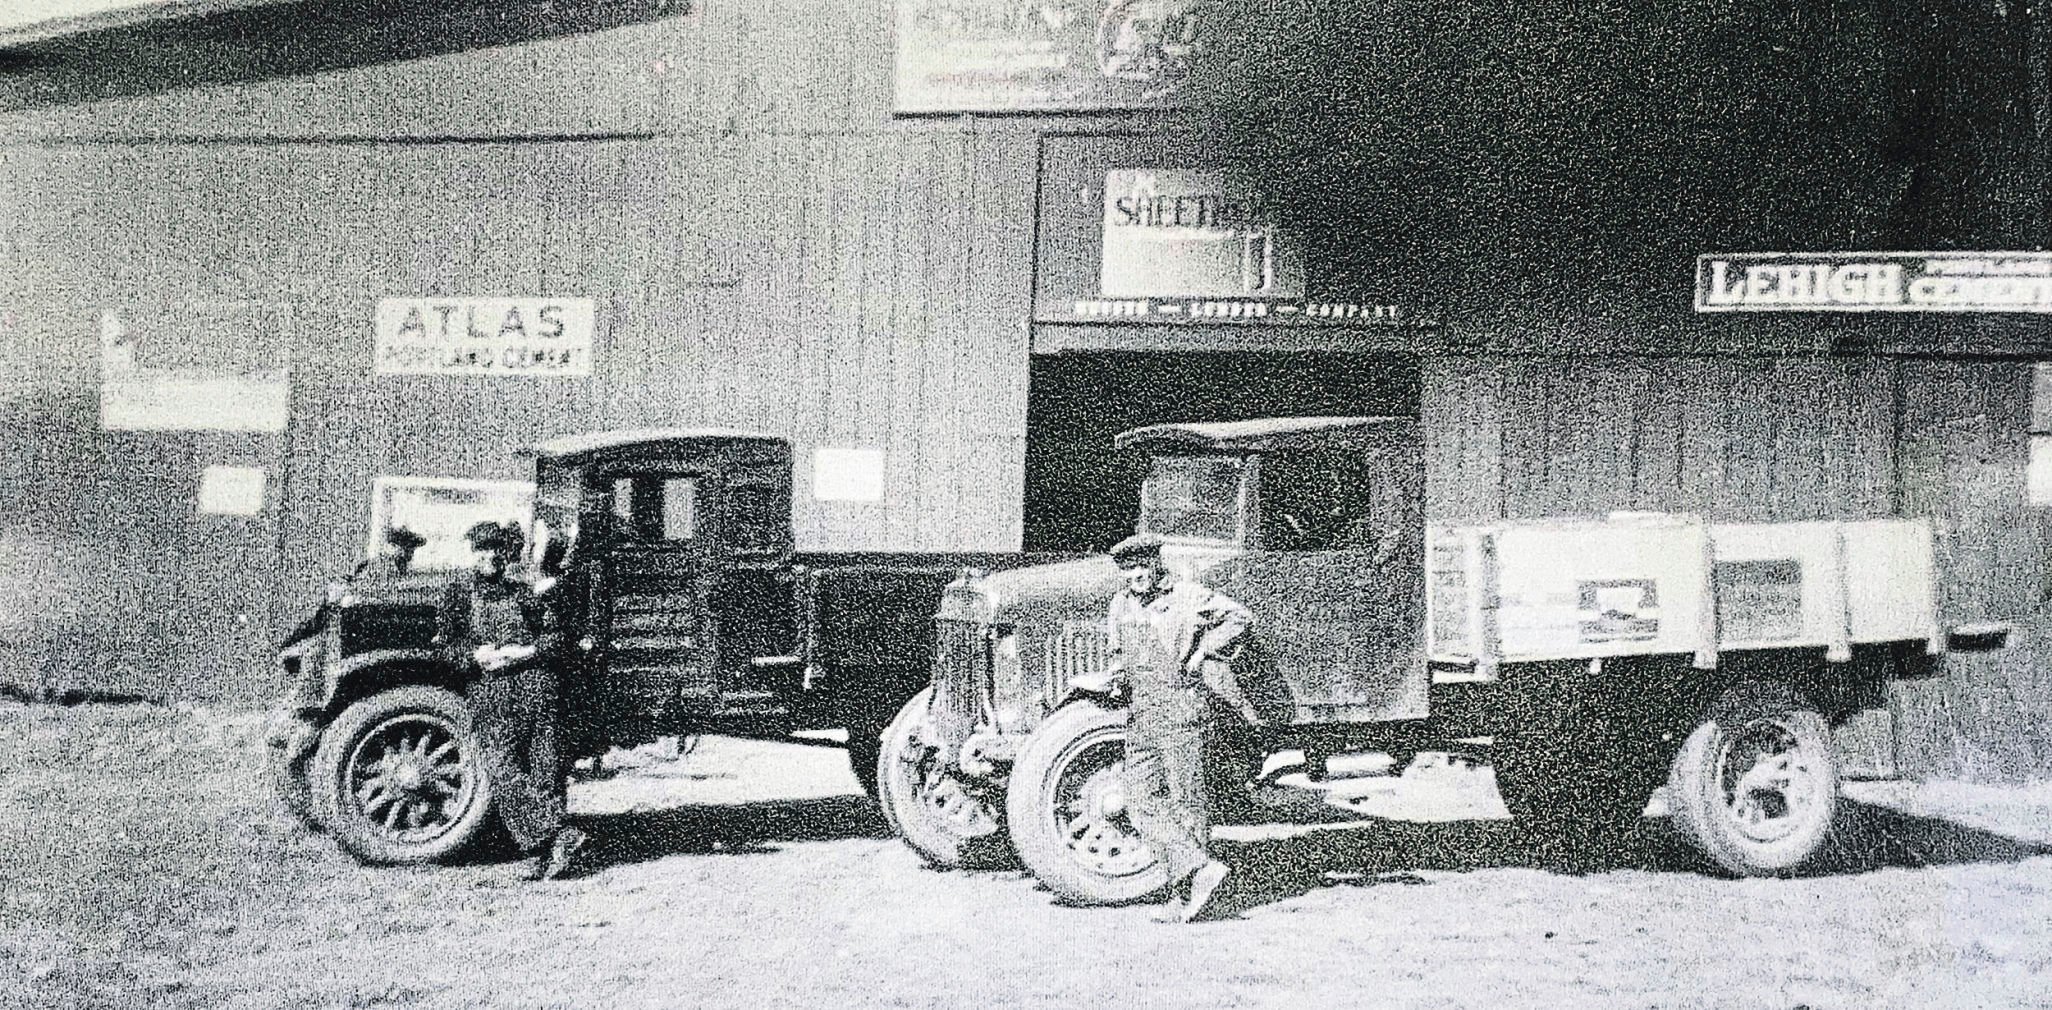 Meuser Lumber Co. trucks are seen circa 1930 in Guttenberg, Iowa. The company once operated a feed mill and harvested ice during its early years.    PHOTO CREDIT: Contributed